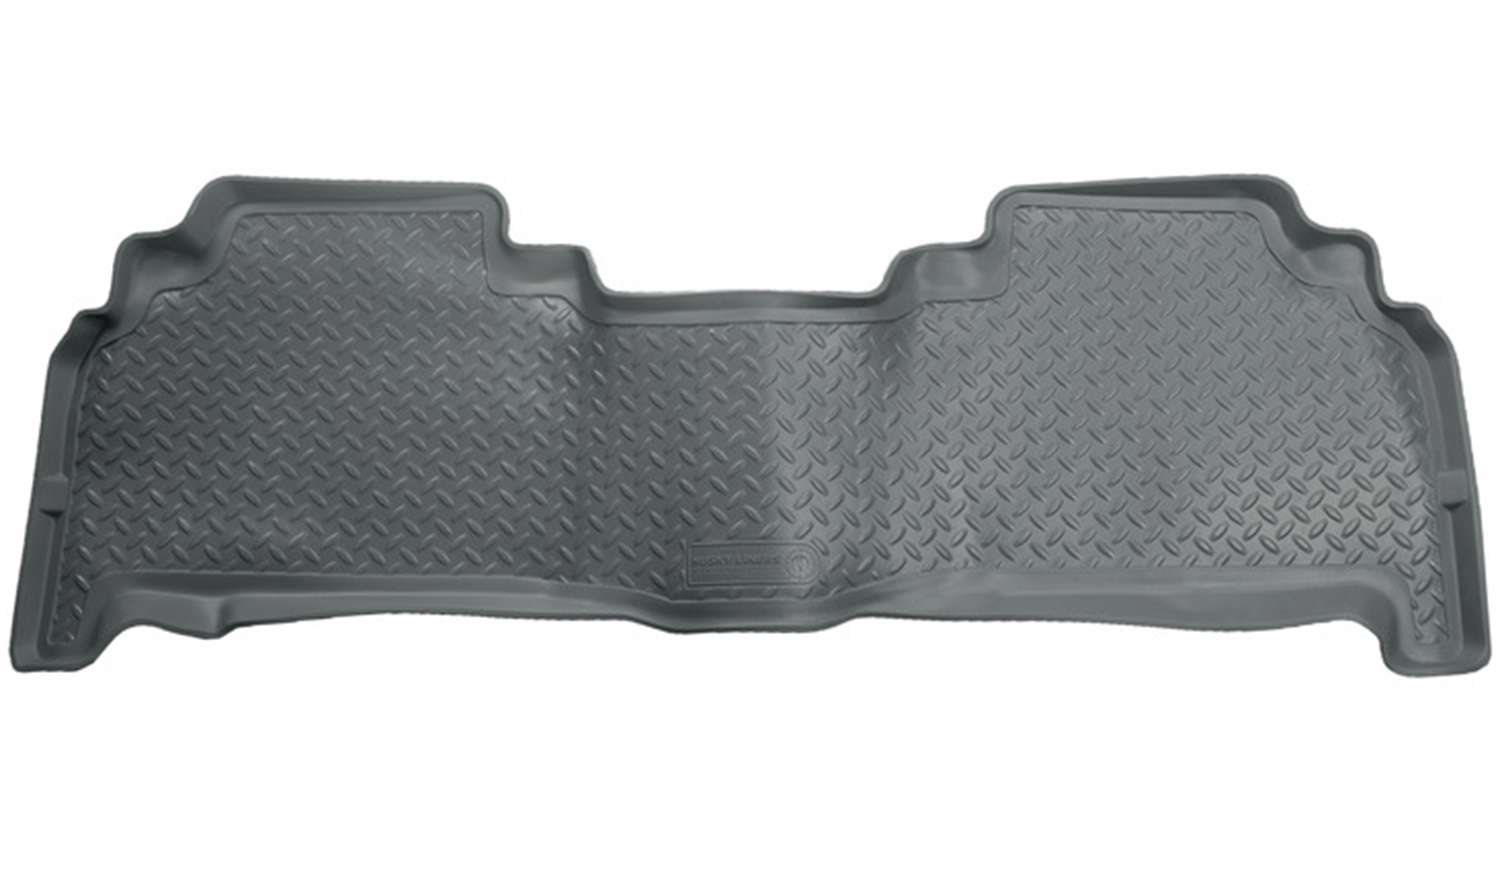 Husky Liners Husky Liners 65332 Classic Style; Floor Liner Fits 08-14 Land Cruiser LX570